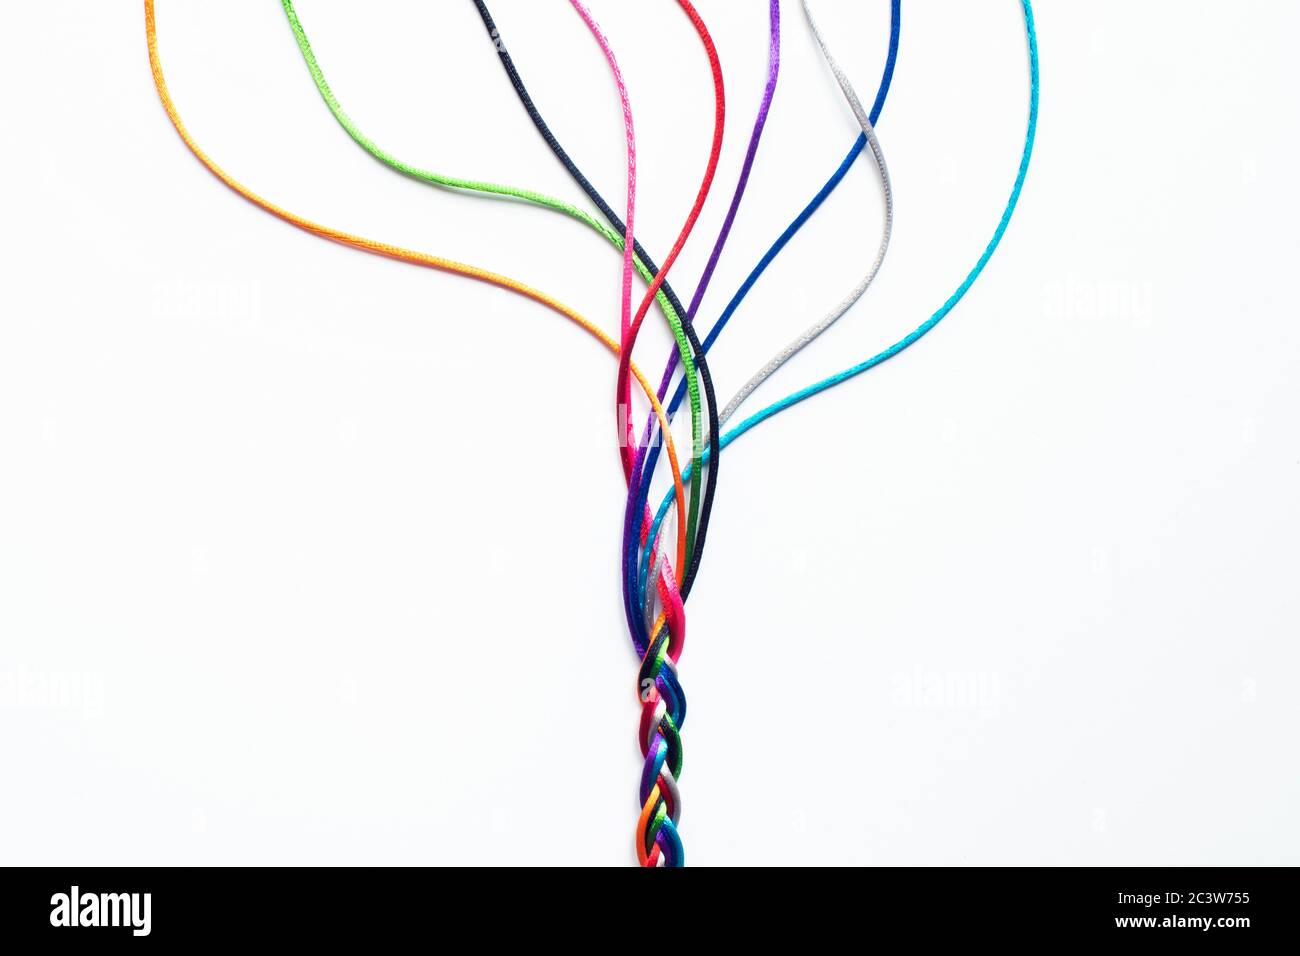 Coloured String Woven Together To Illustrate Concepts Of Unity Society Togetherness and Cooperation Stock Photo